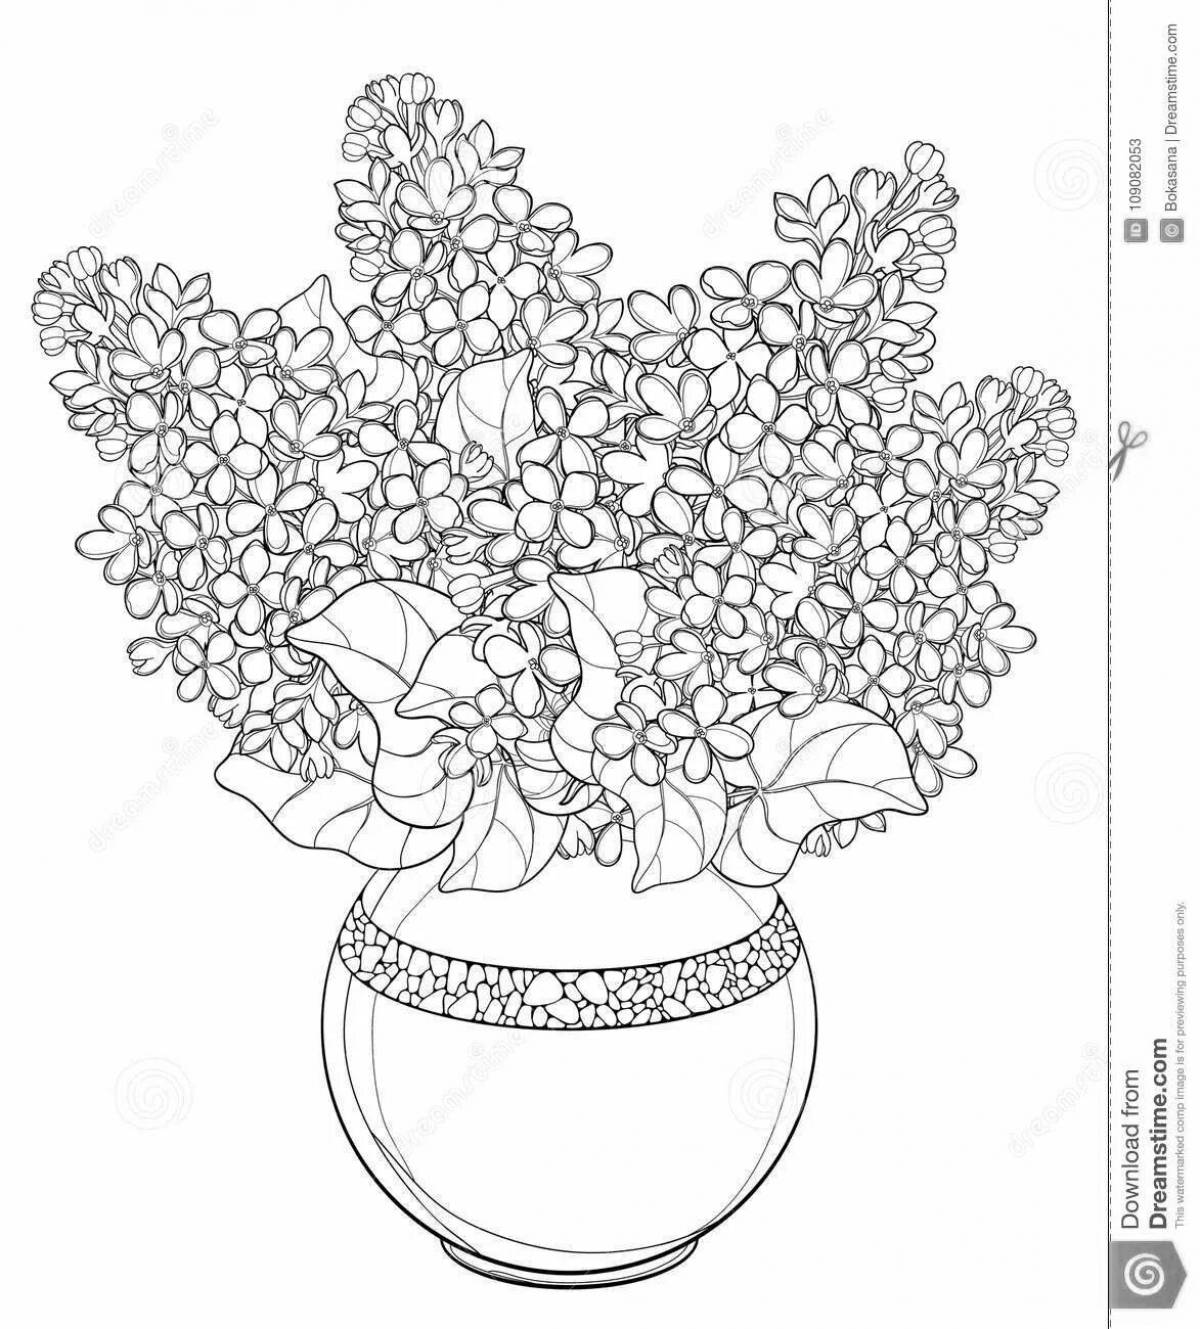 Coloring page adorable big flowers in a vase